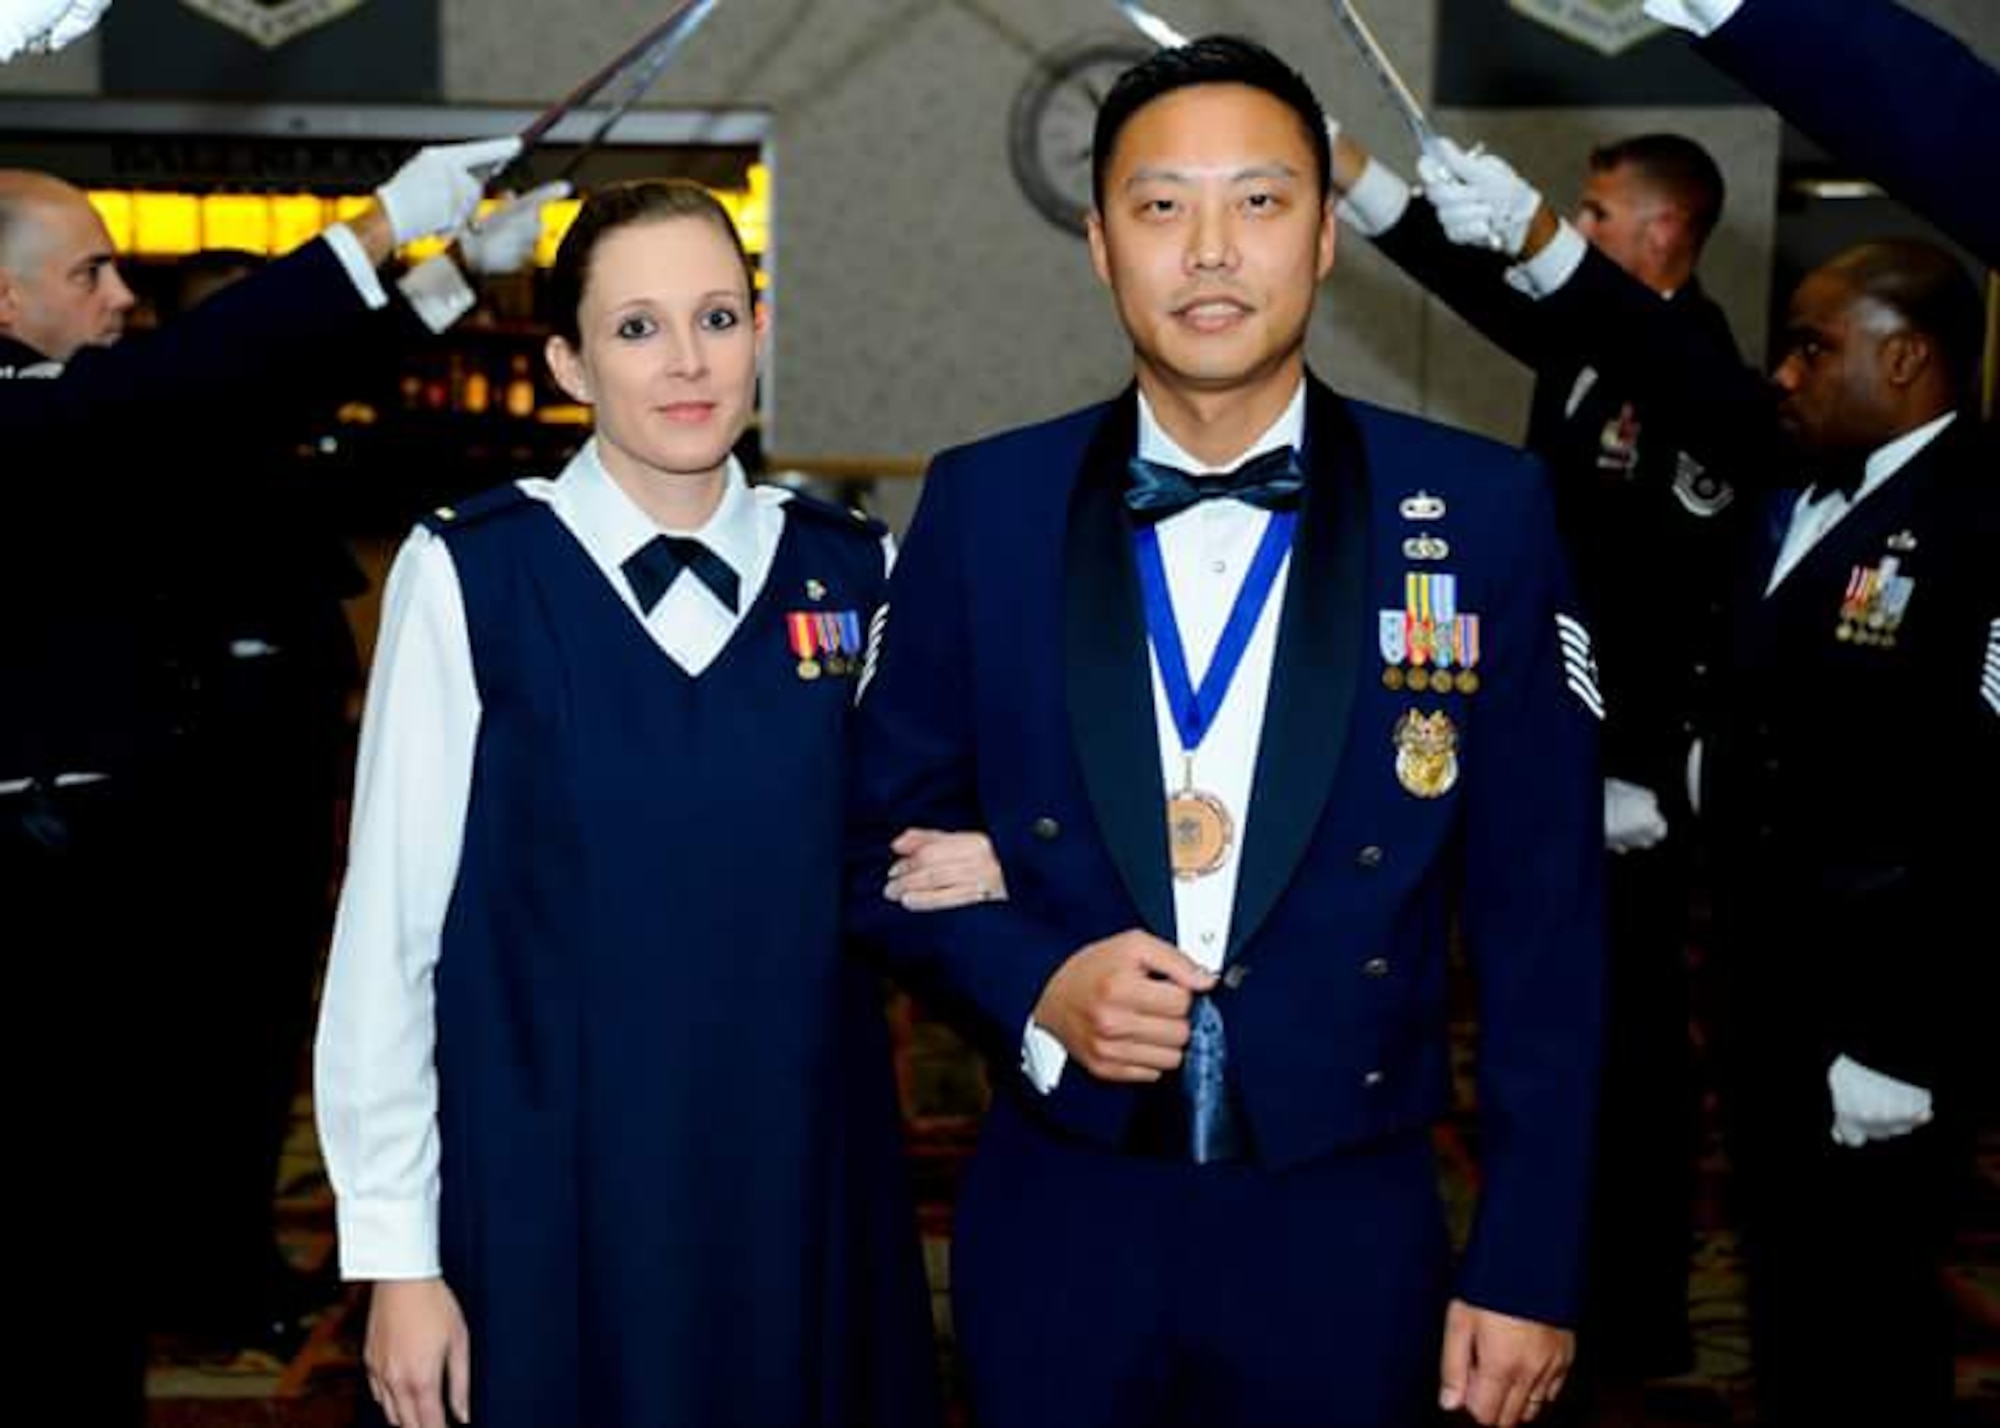 Second Lt. Nadine Suh, 22nd Medical Support Squadron TRICARE Operations and Patient Administration flight commander, and Tech. Sgt. Young Suh, 22nd Contracting Squadron plans and programs section chief, pose for a photo during Young’s Senior NCO Induction Ceremony, Oct. 2, 2015, at McConnell Air Force Base, Kan. Nadine and Young, who met in Austria in 2005, are currently assigned to McConnell AFB through a joint-spouse assignment after Nadine commissioned through the Air Force Commissioned Officer Training Medical Service Corps program in 2014. (U.S. Air Force photo/Senior Airman Victor J. Caputo)